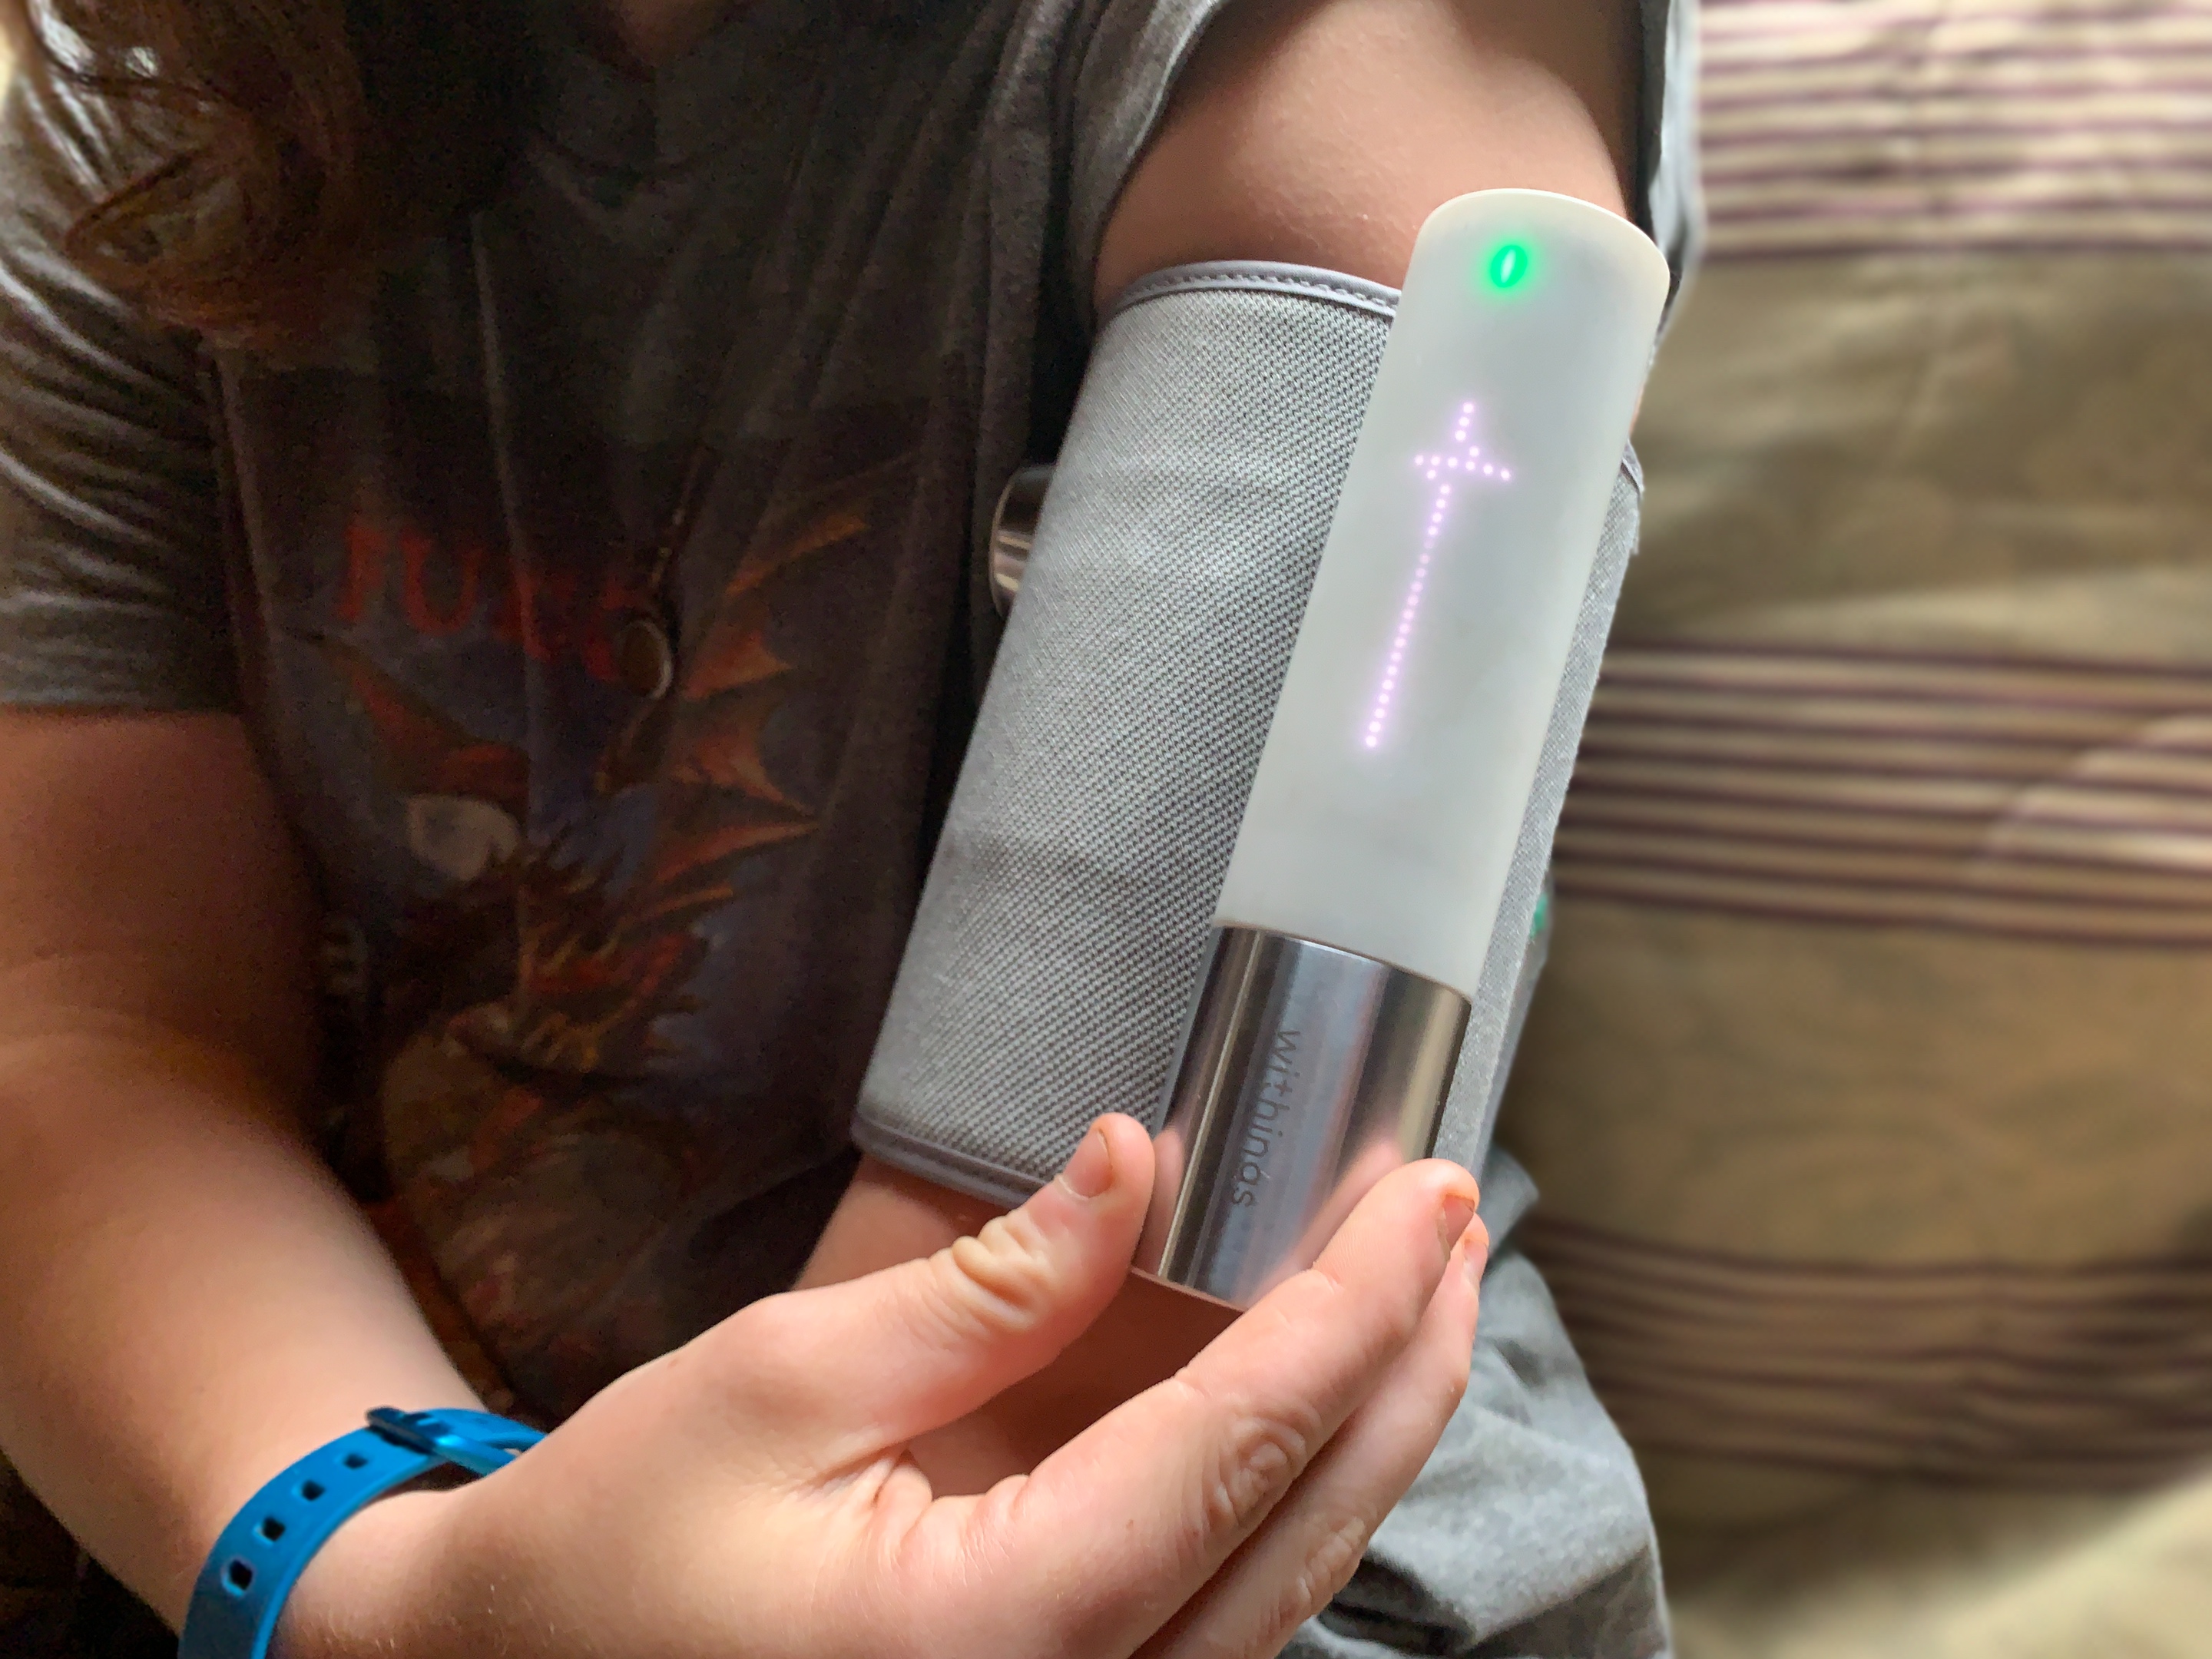 Review: Withings BPM Connect smart Blood pressure monitor 